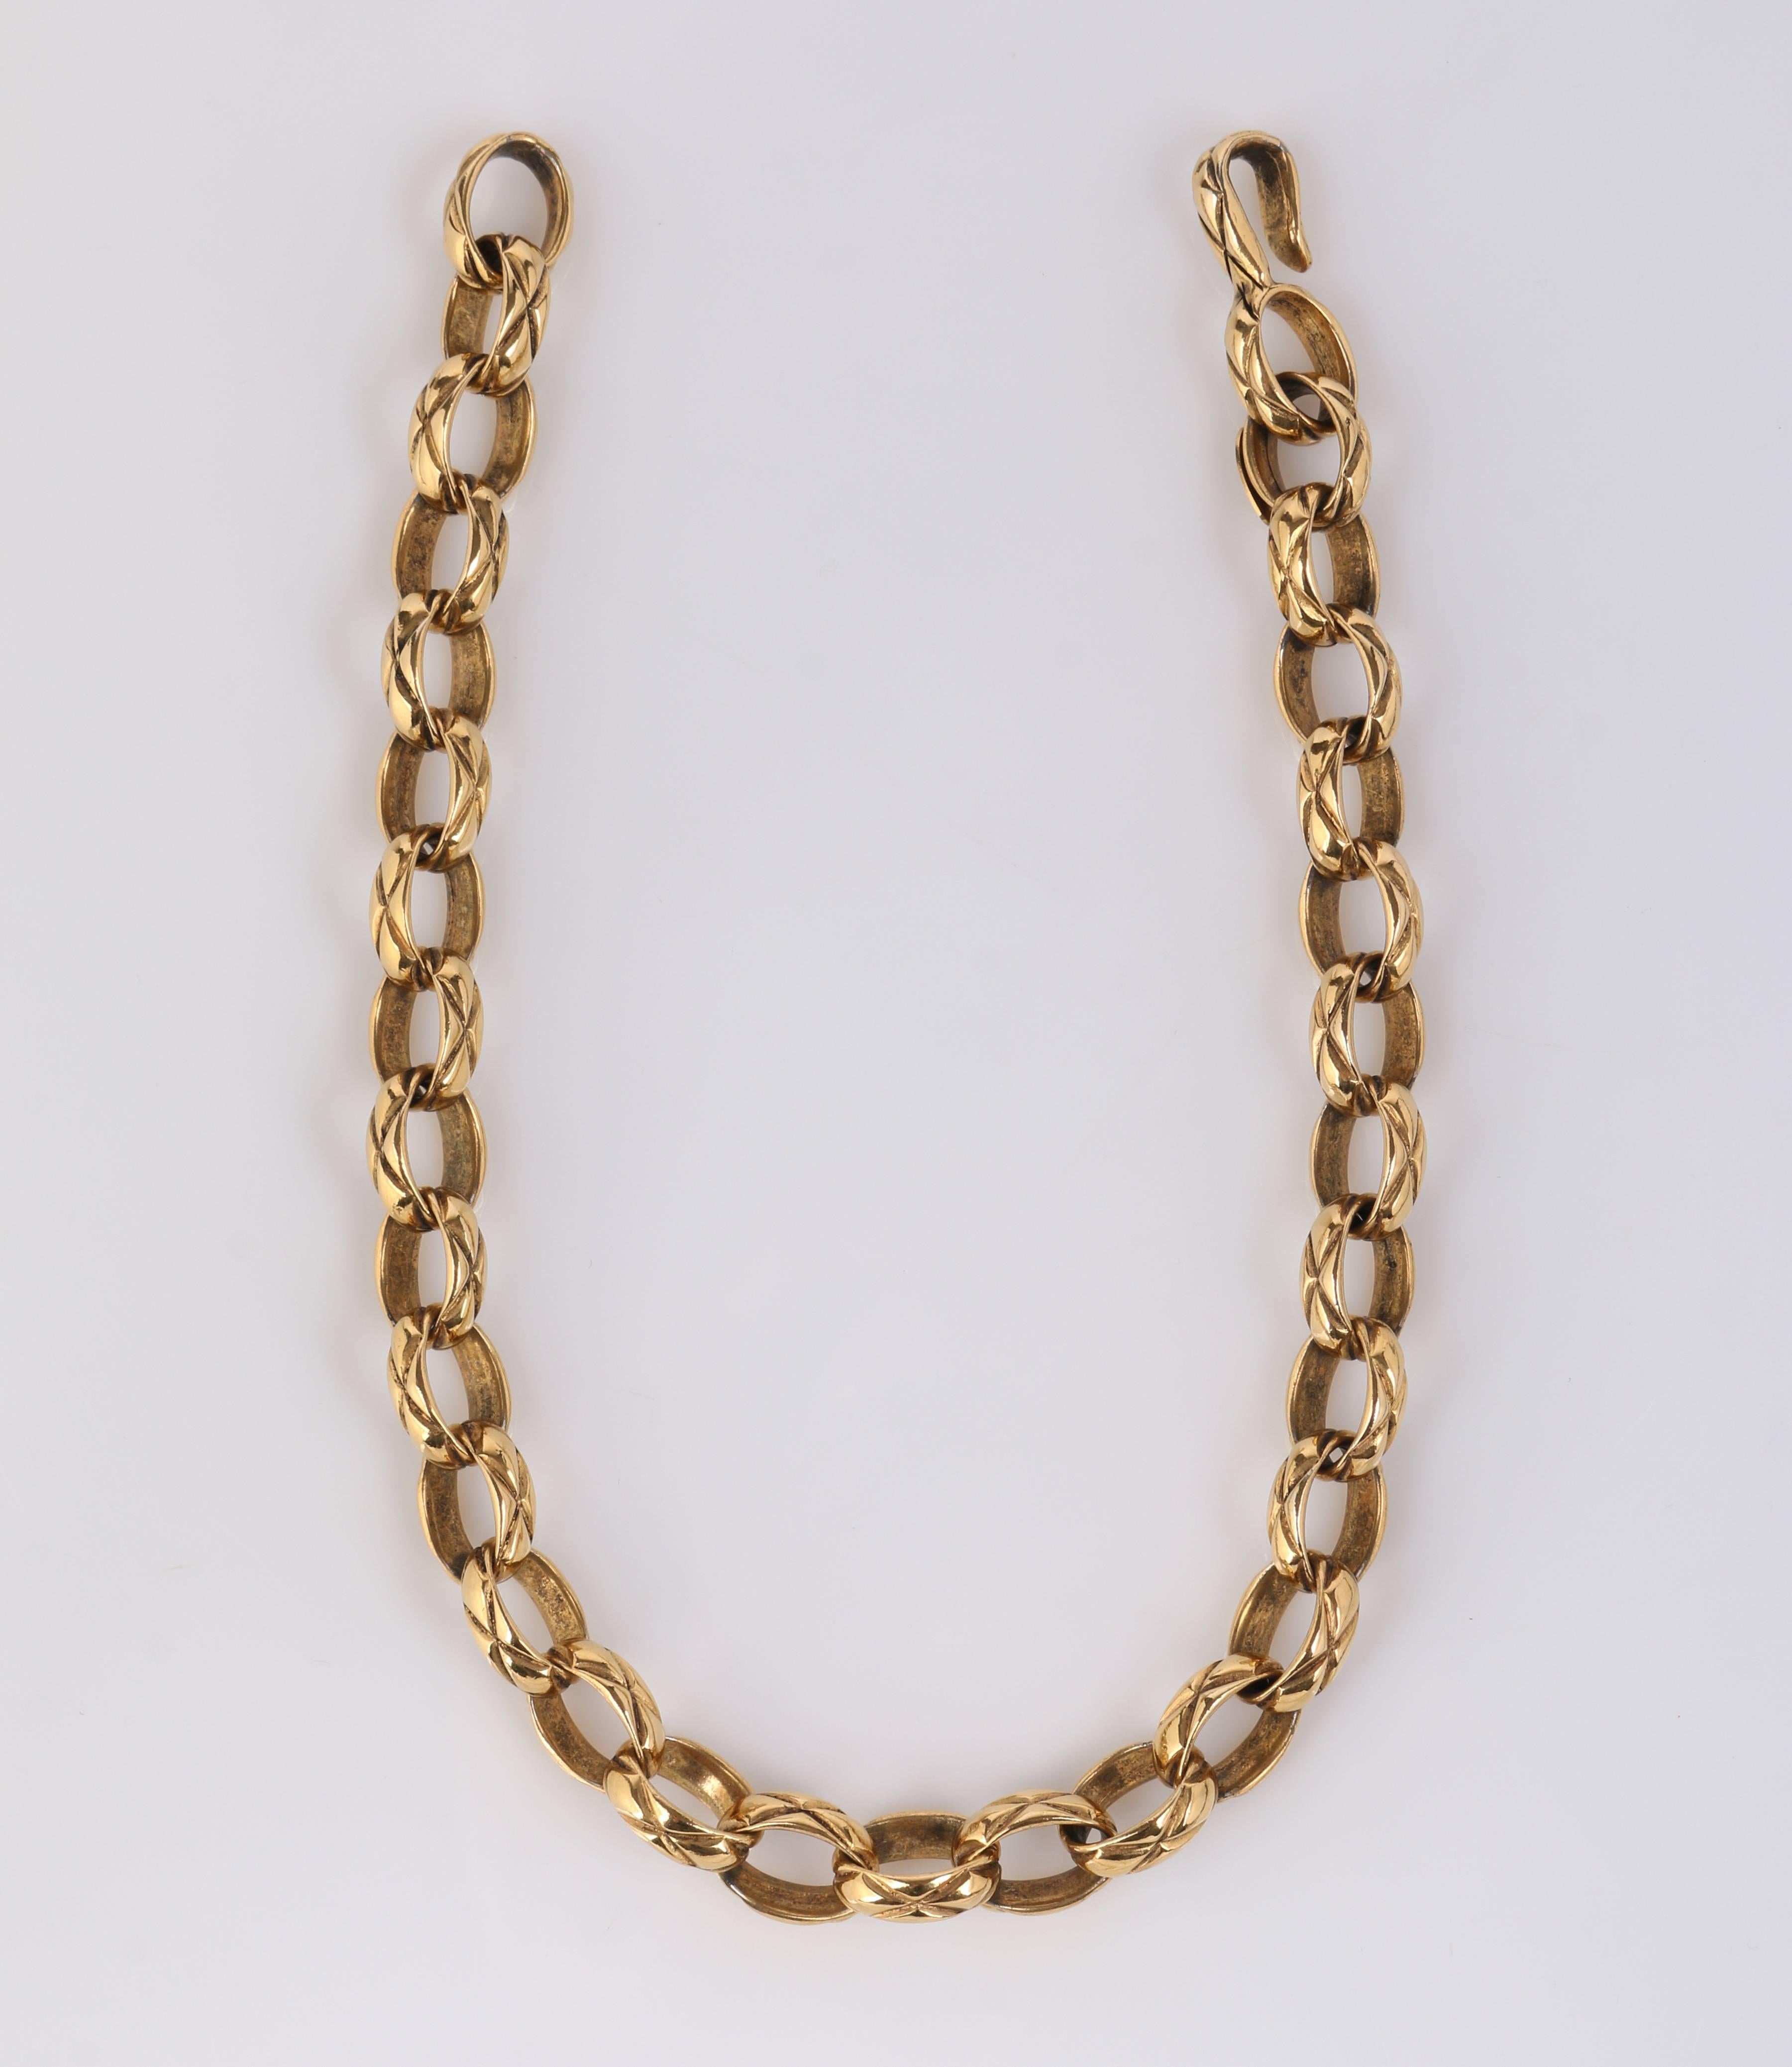 CHANEL c.1986 Season 23 Gold Heavy Oval Link Chain Quilted Grooved Necklace 1